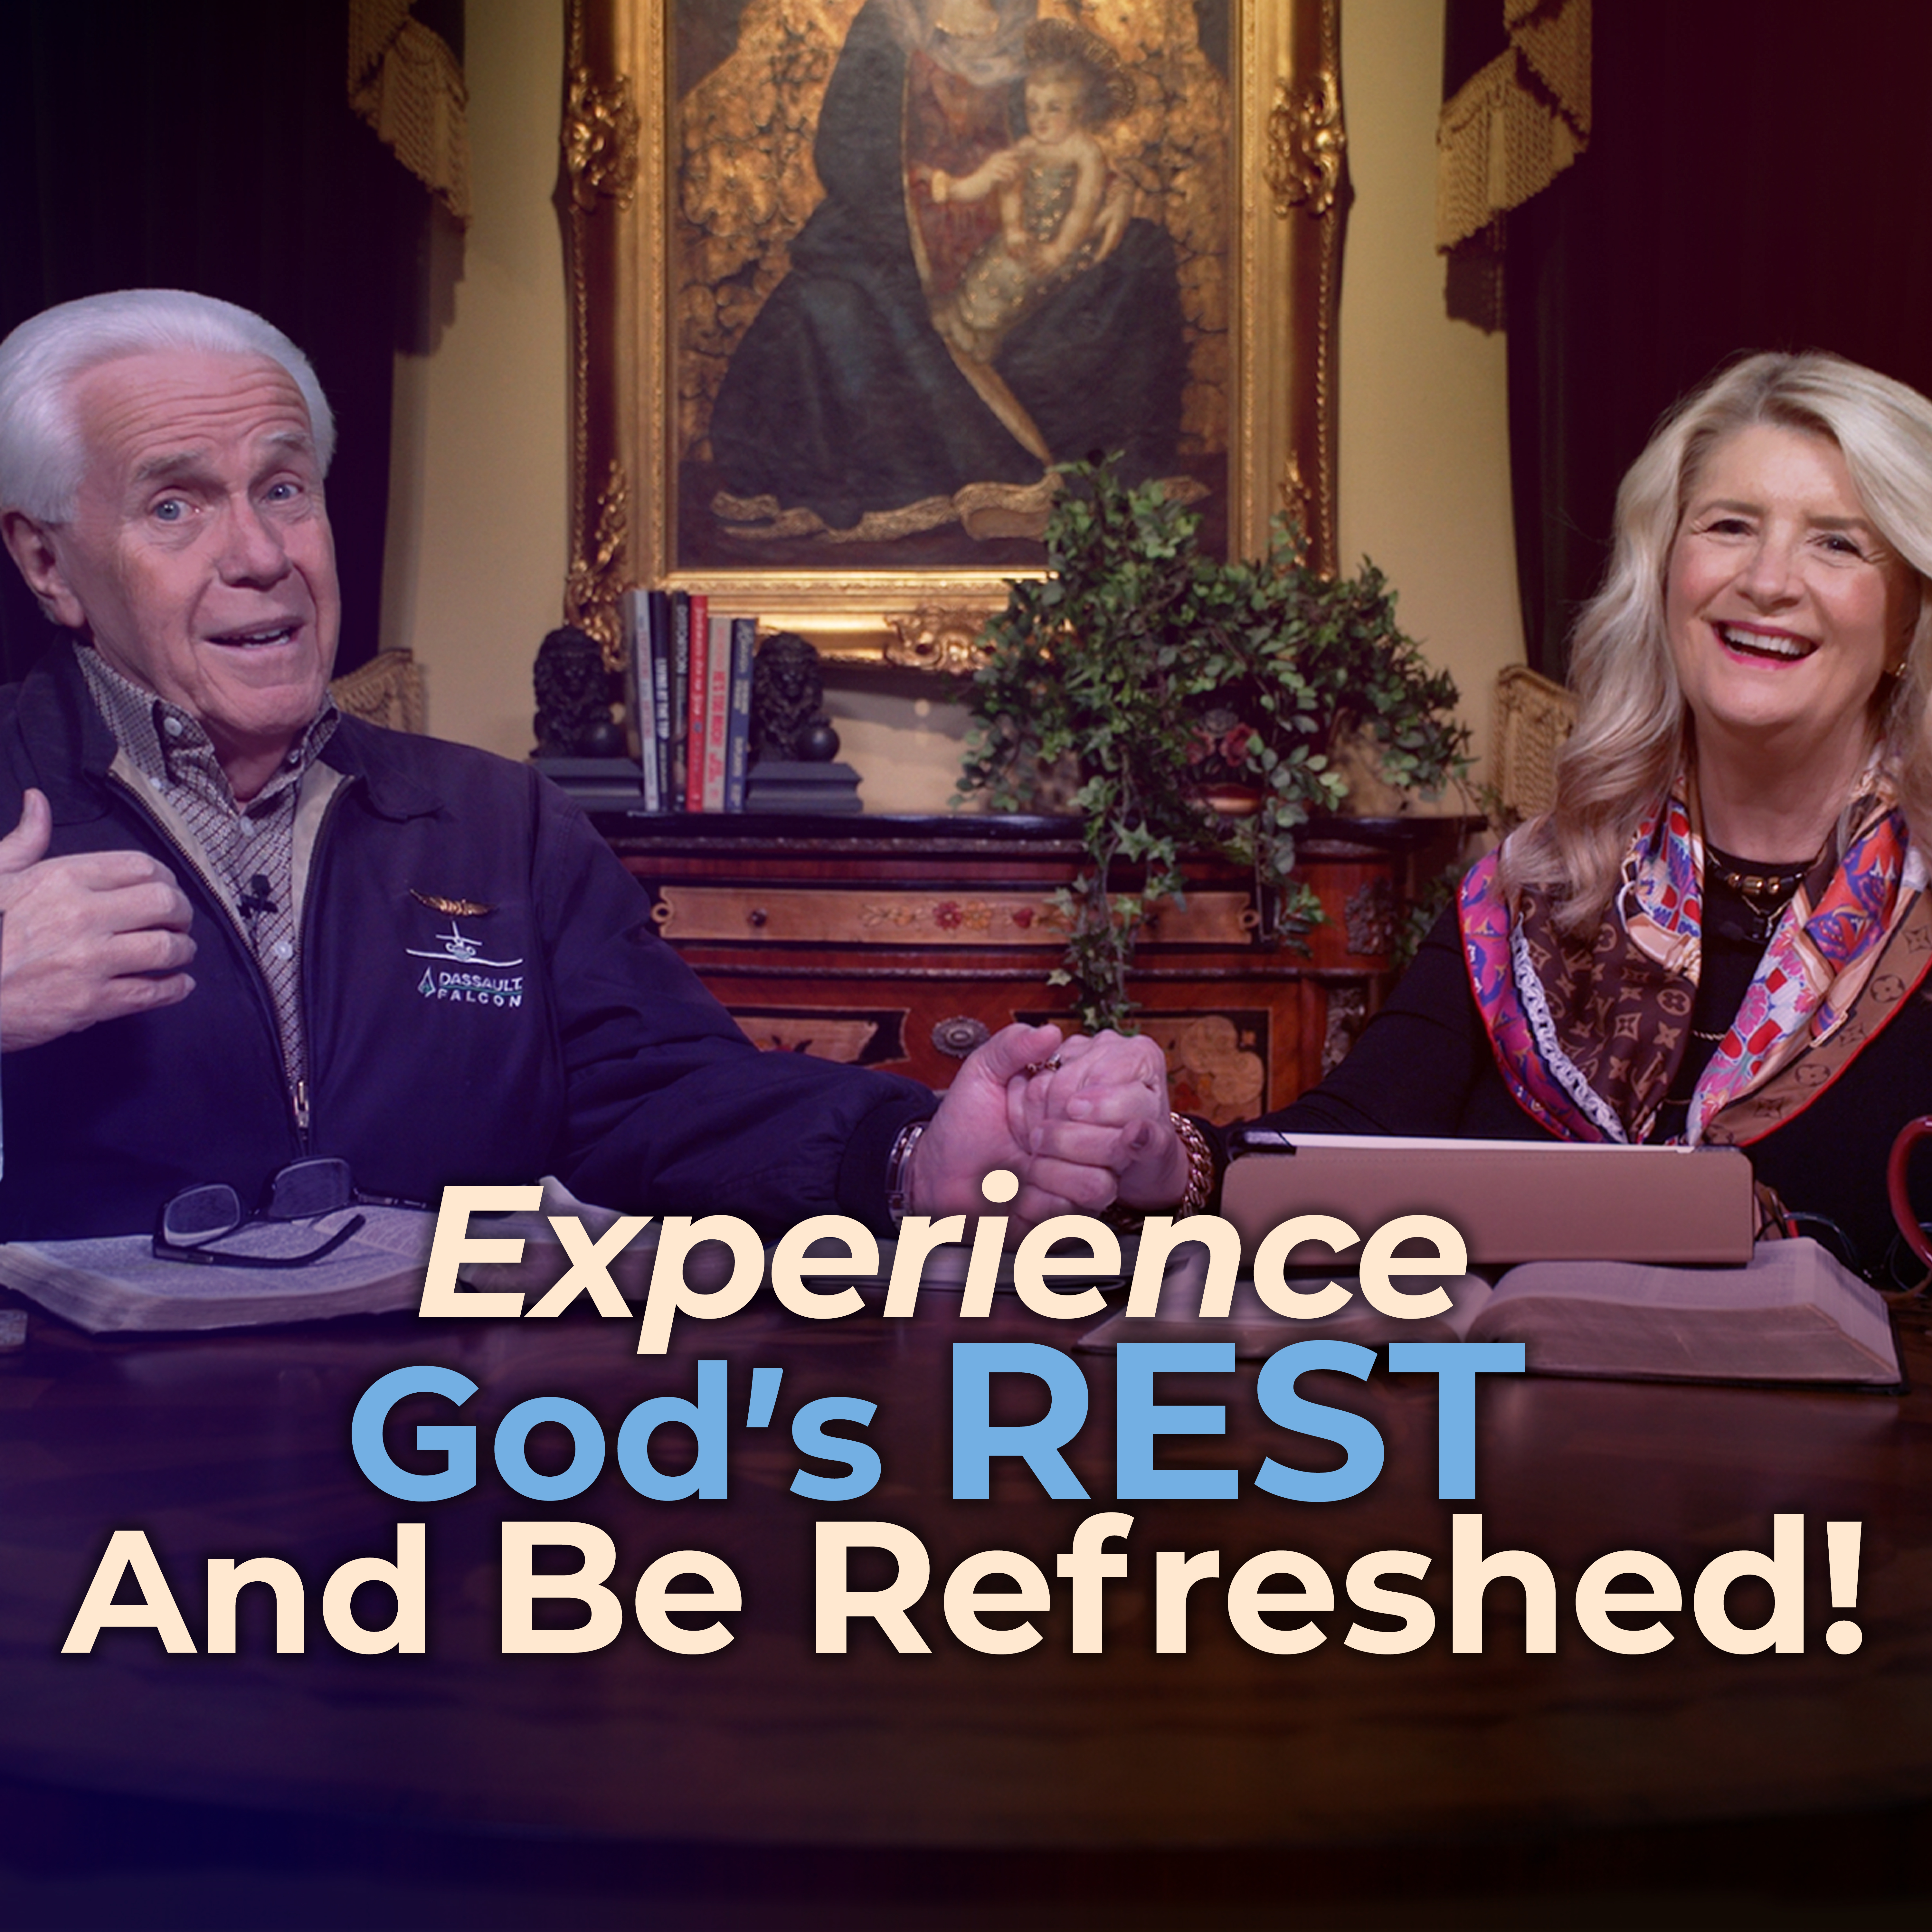 Experience God’s REST And Be Refreshed!